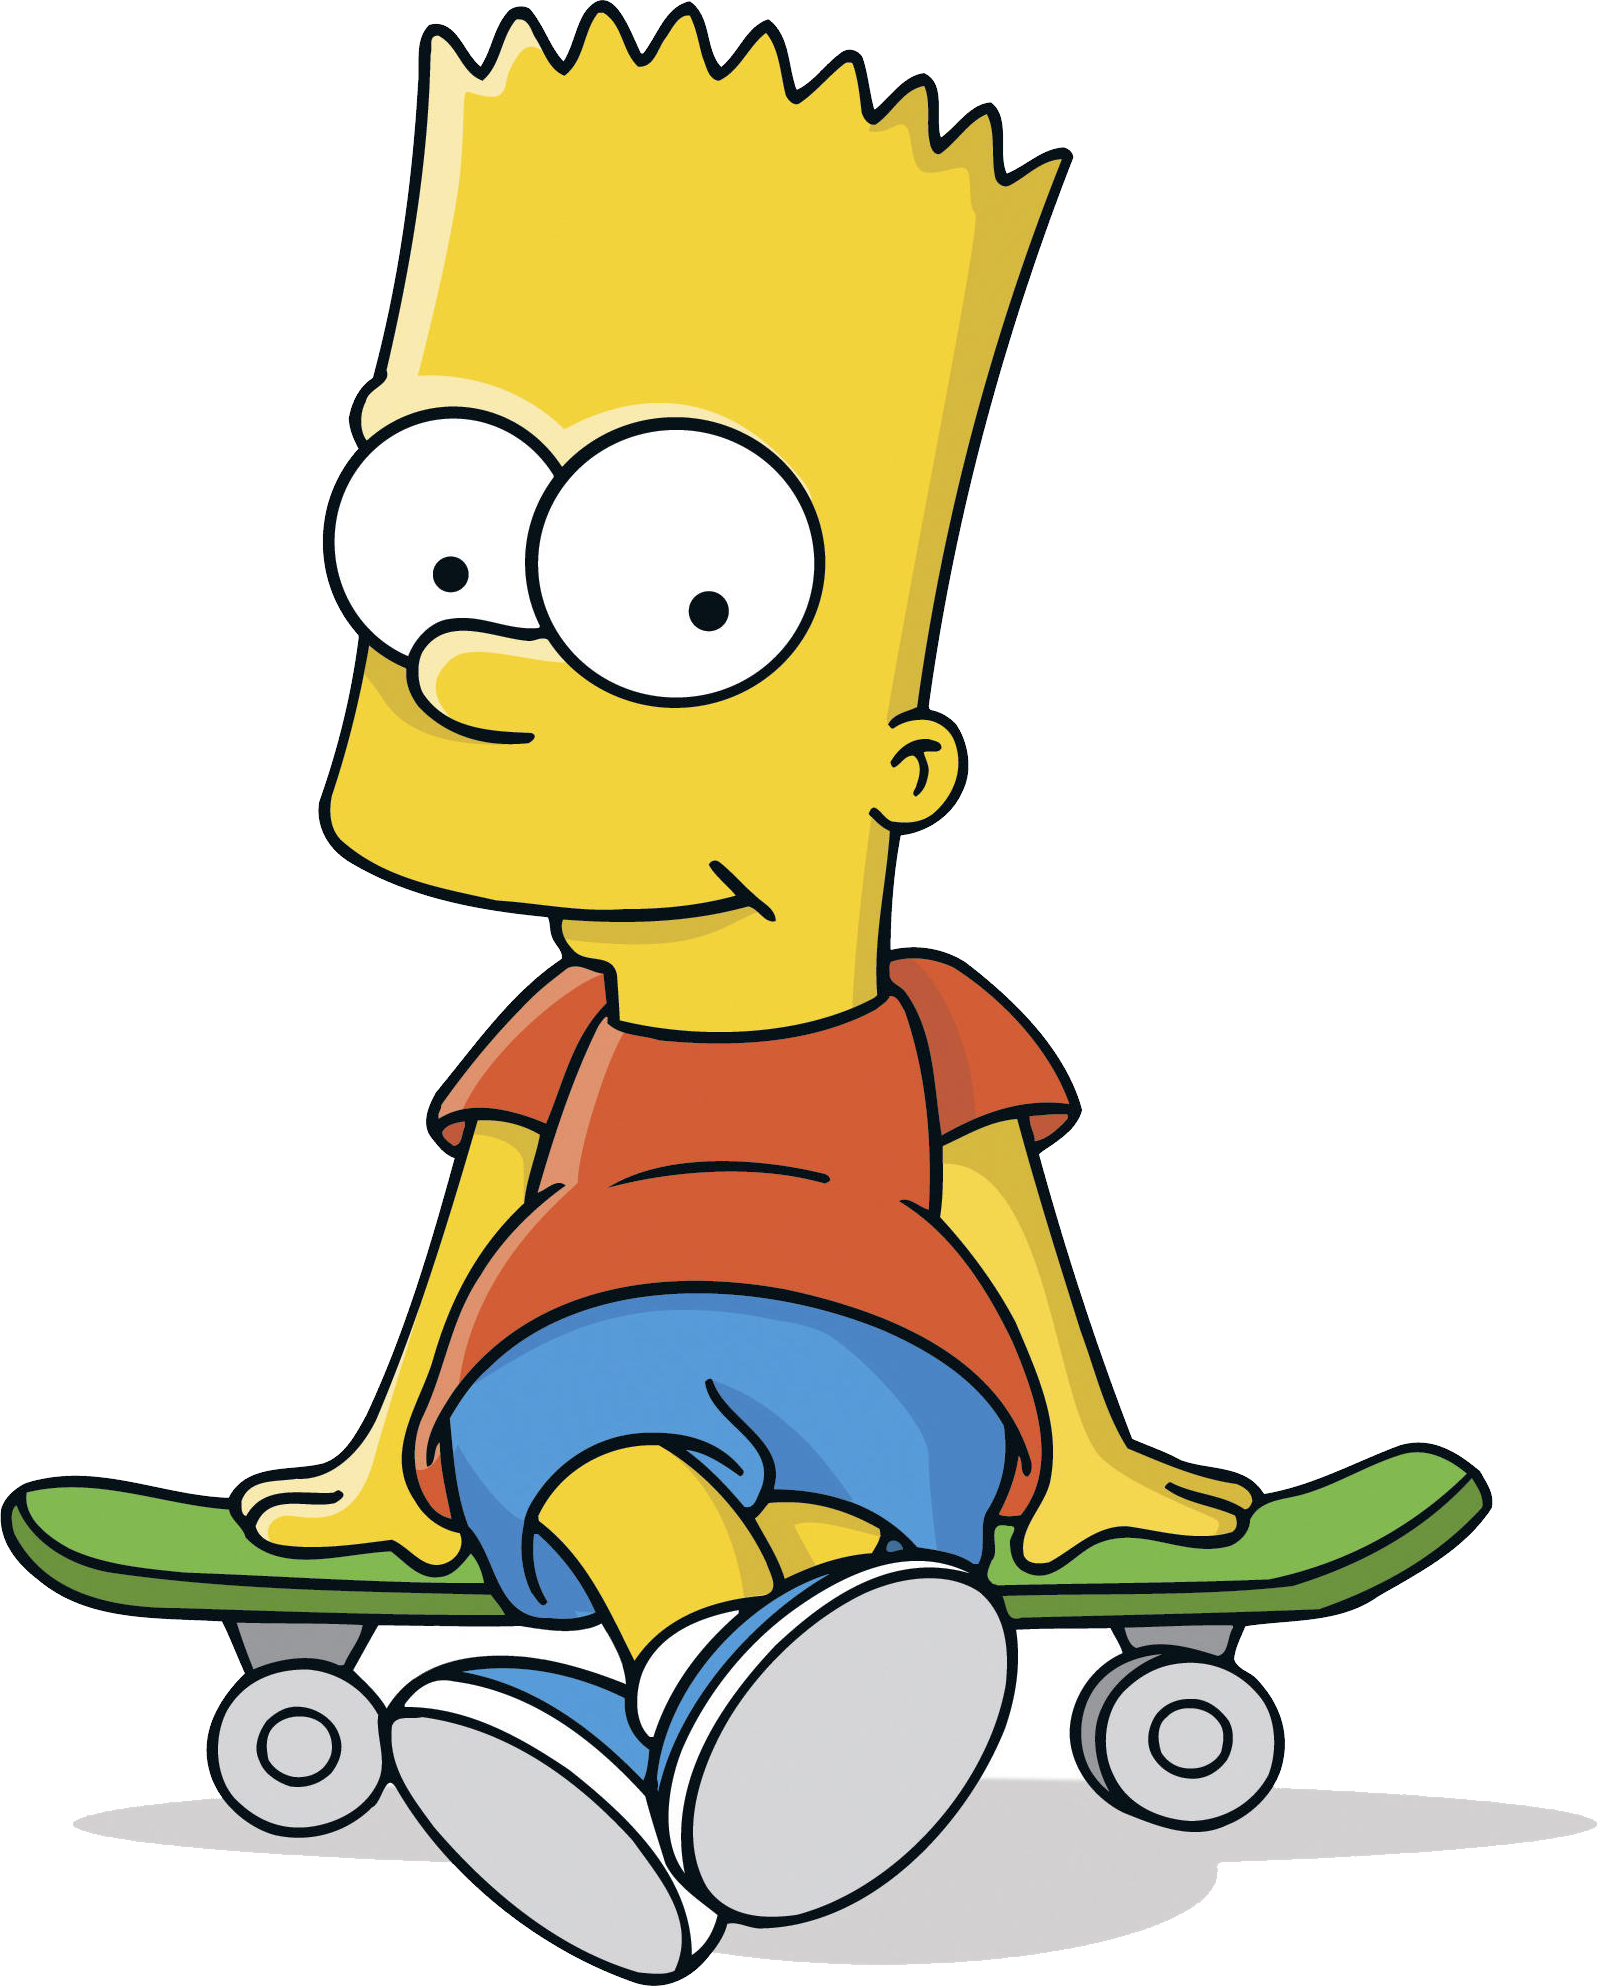 Simpsons The Cartoon PNG Image High Quality PNG Image